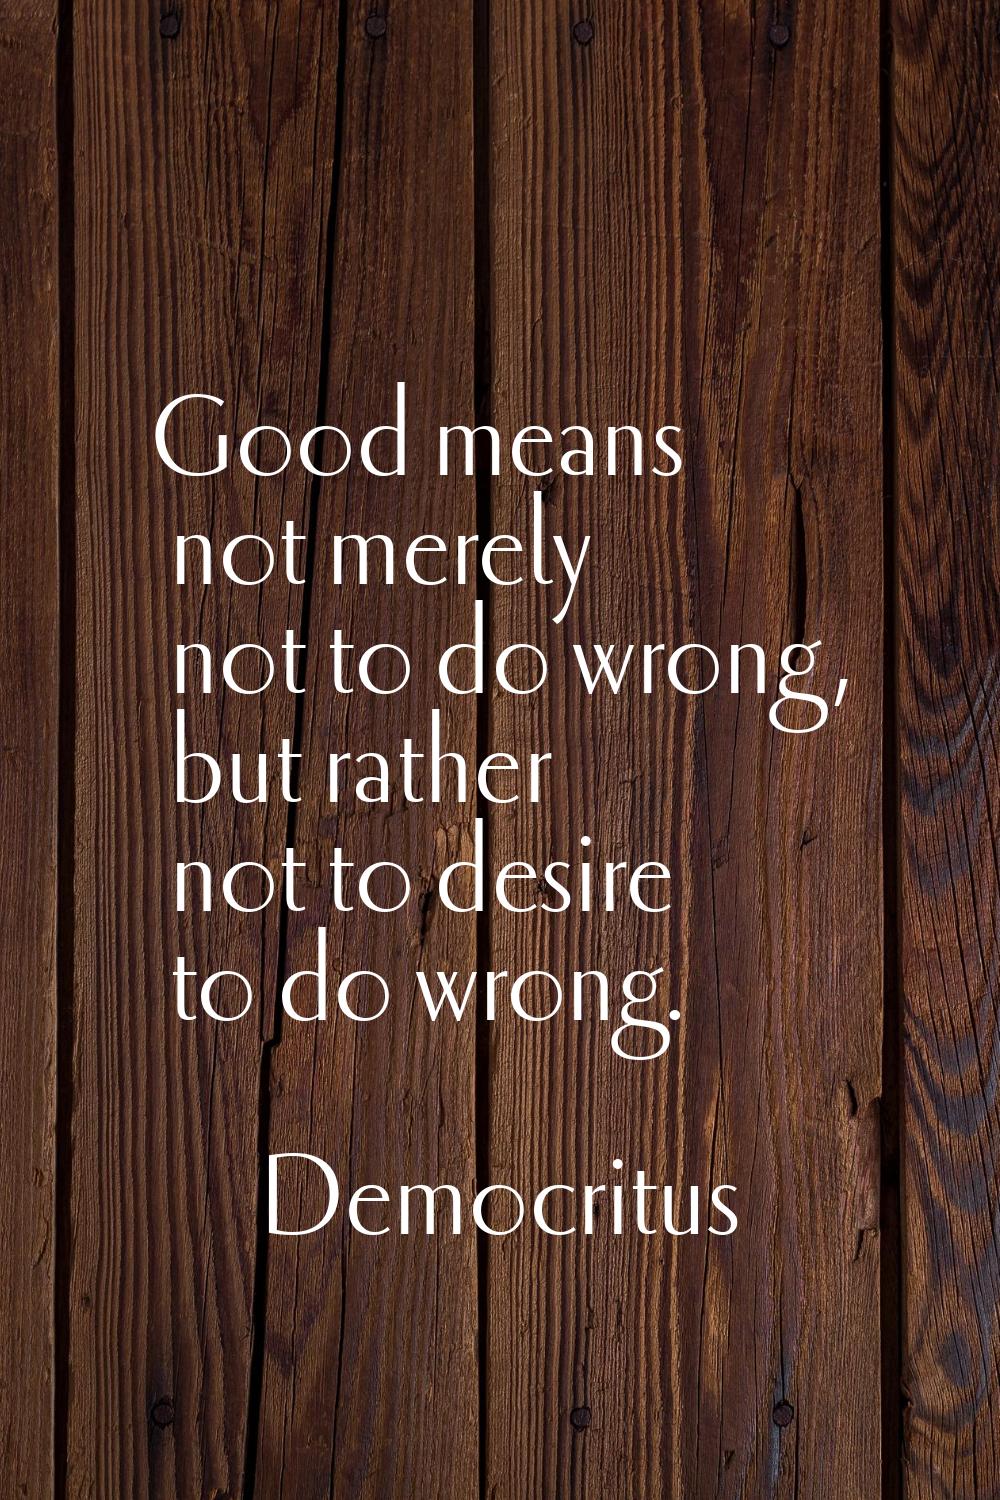 Good means not merely not to do wrong, but rather not to desire to do wrong.